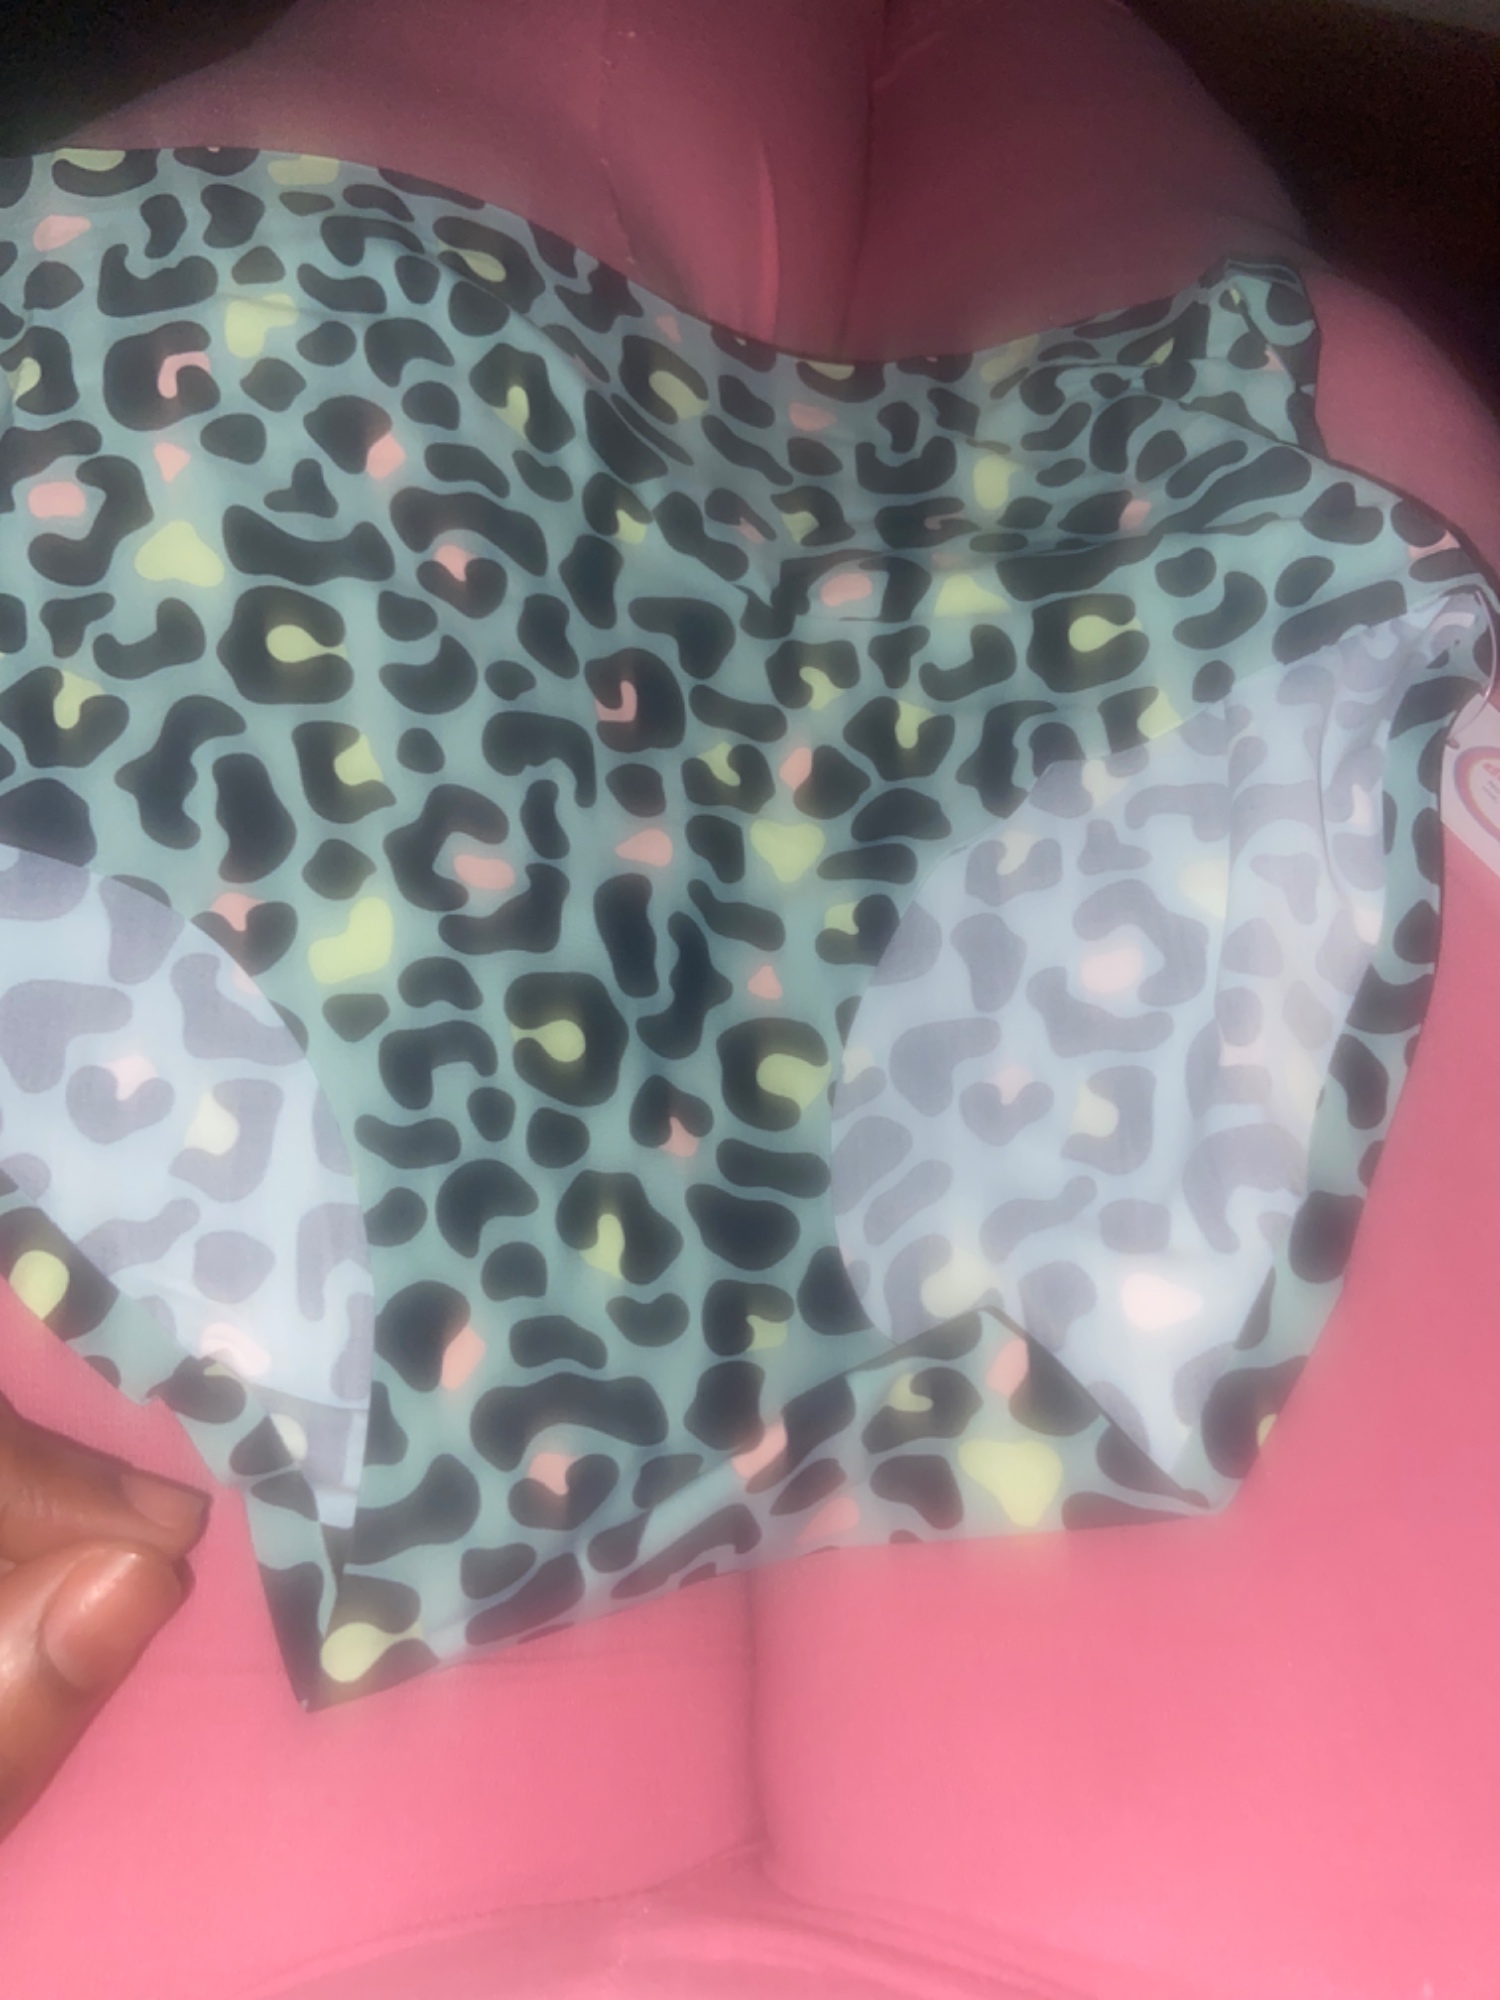 On The Real - Reviews That Are Real - Cheek Boss - Free underwear! You  really do get free pairs of Cheek Boss underwear when you pay shipping  during a recent promotion